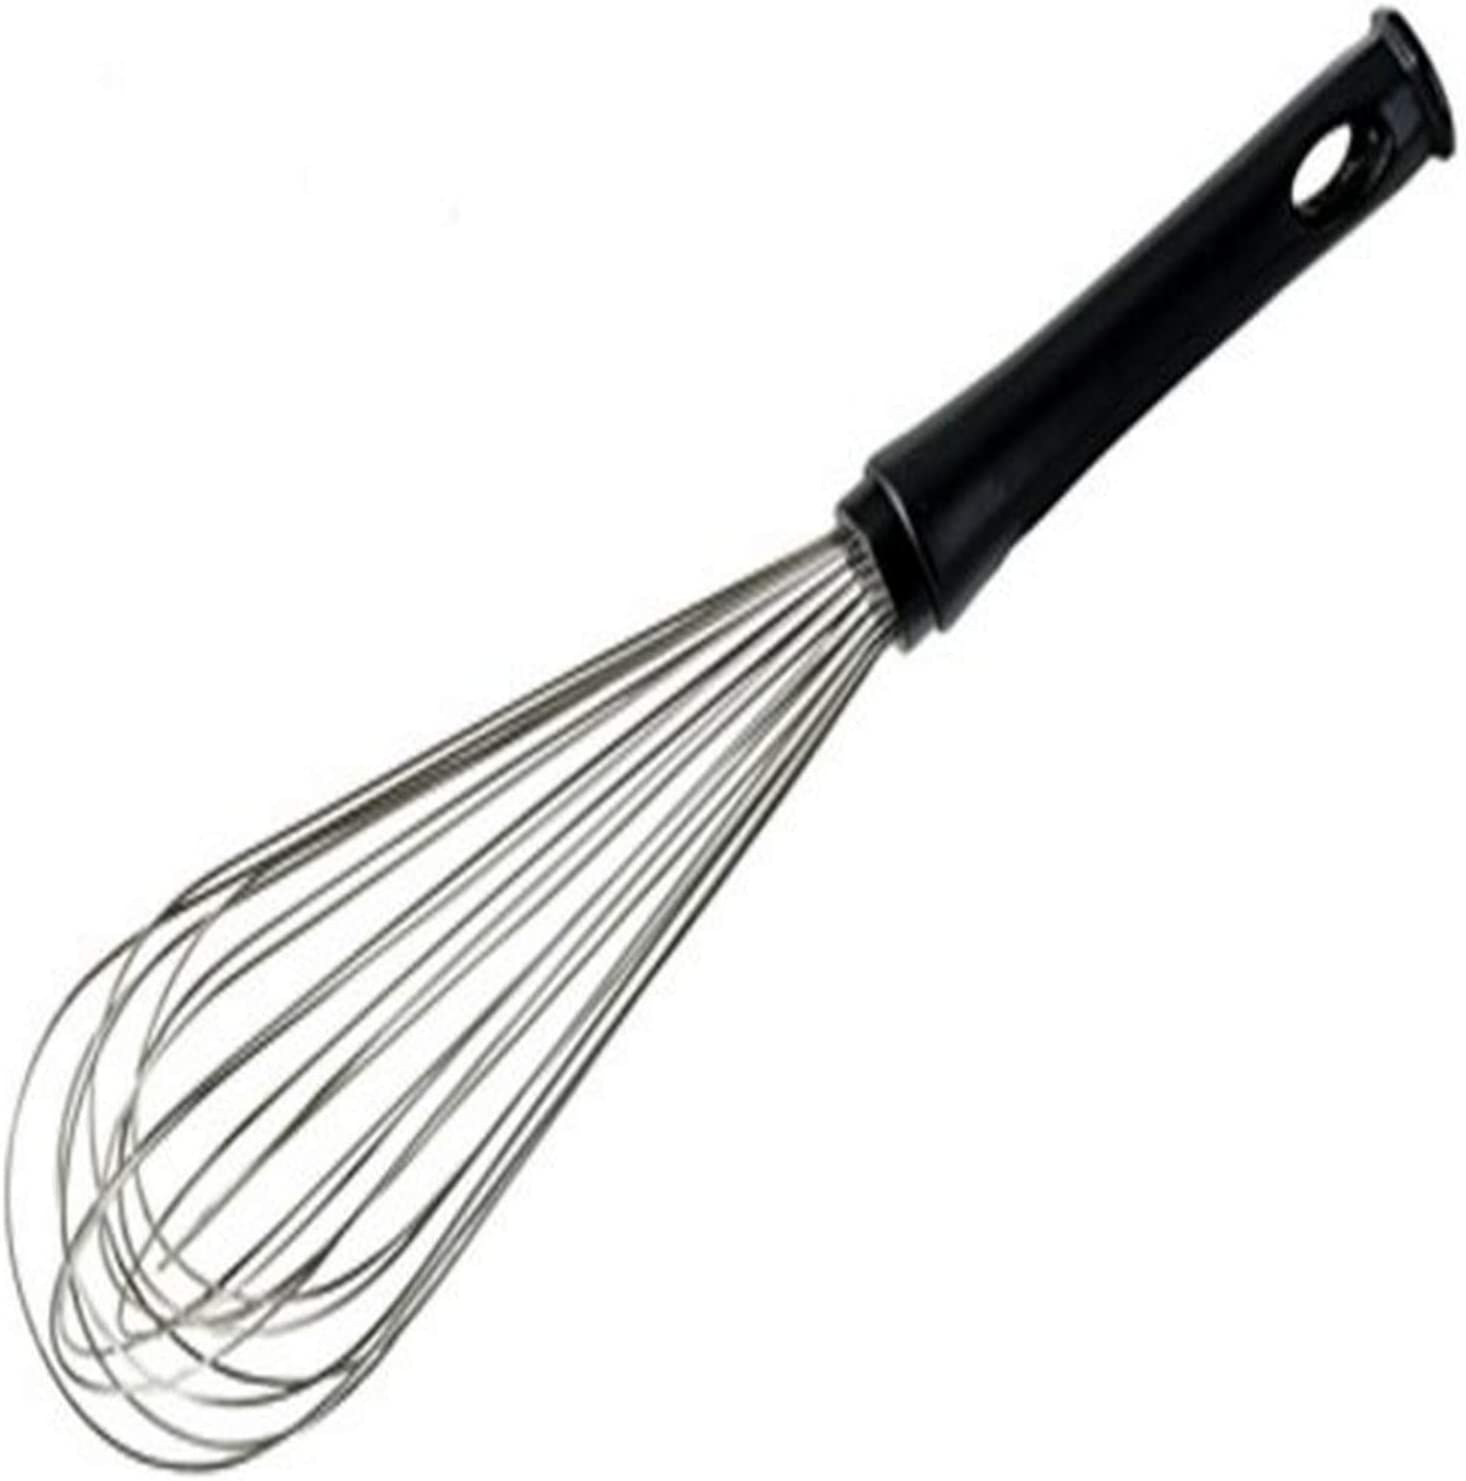 Paderno Whip 11 cm 35 Wires